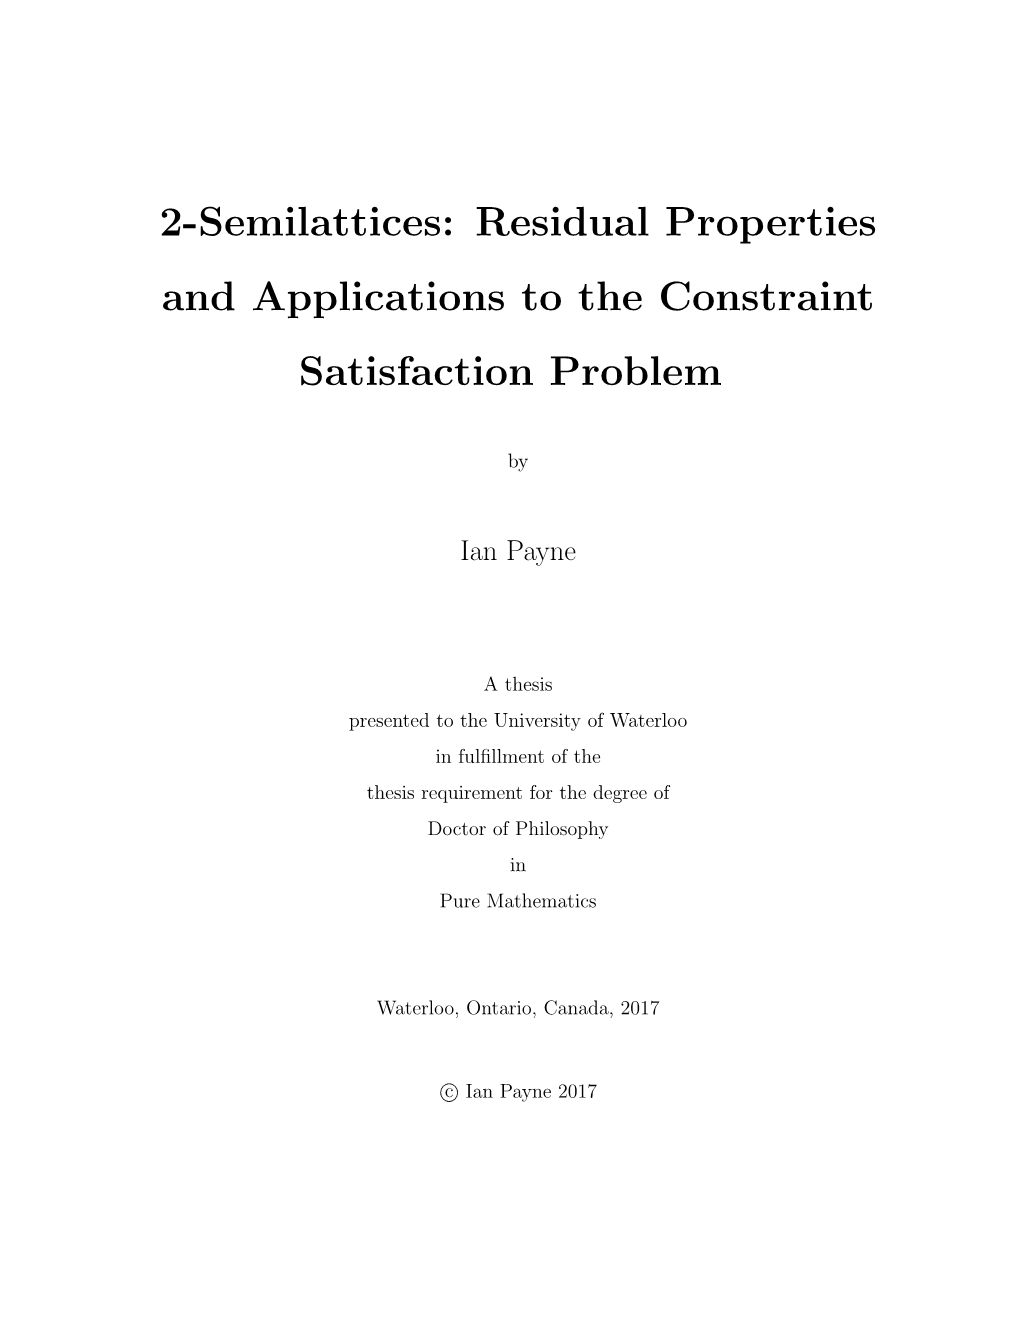 2-Semilattices: Residual Properties and Applications to the Constraint Satisfaction Problem